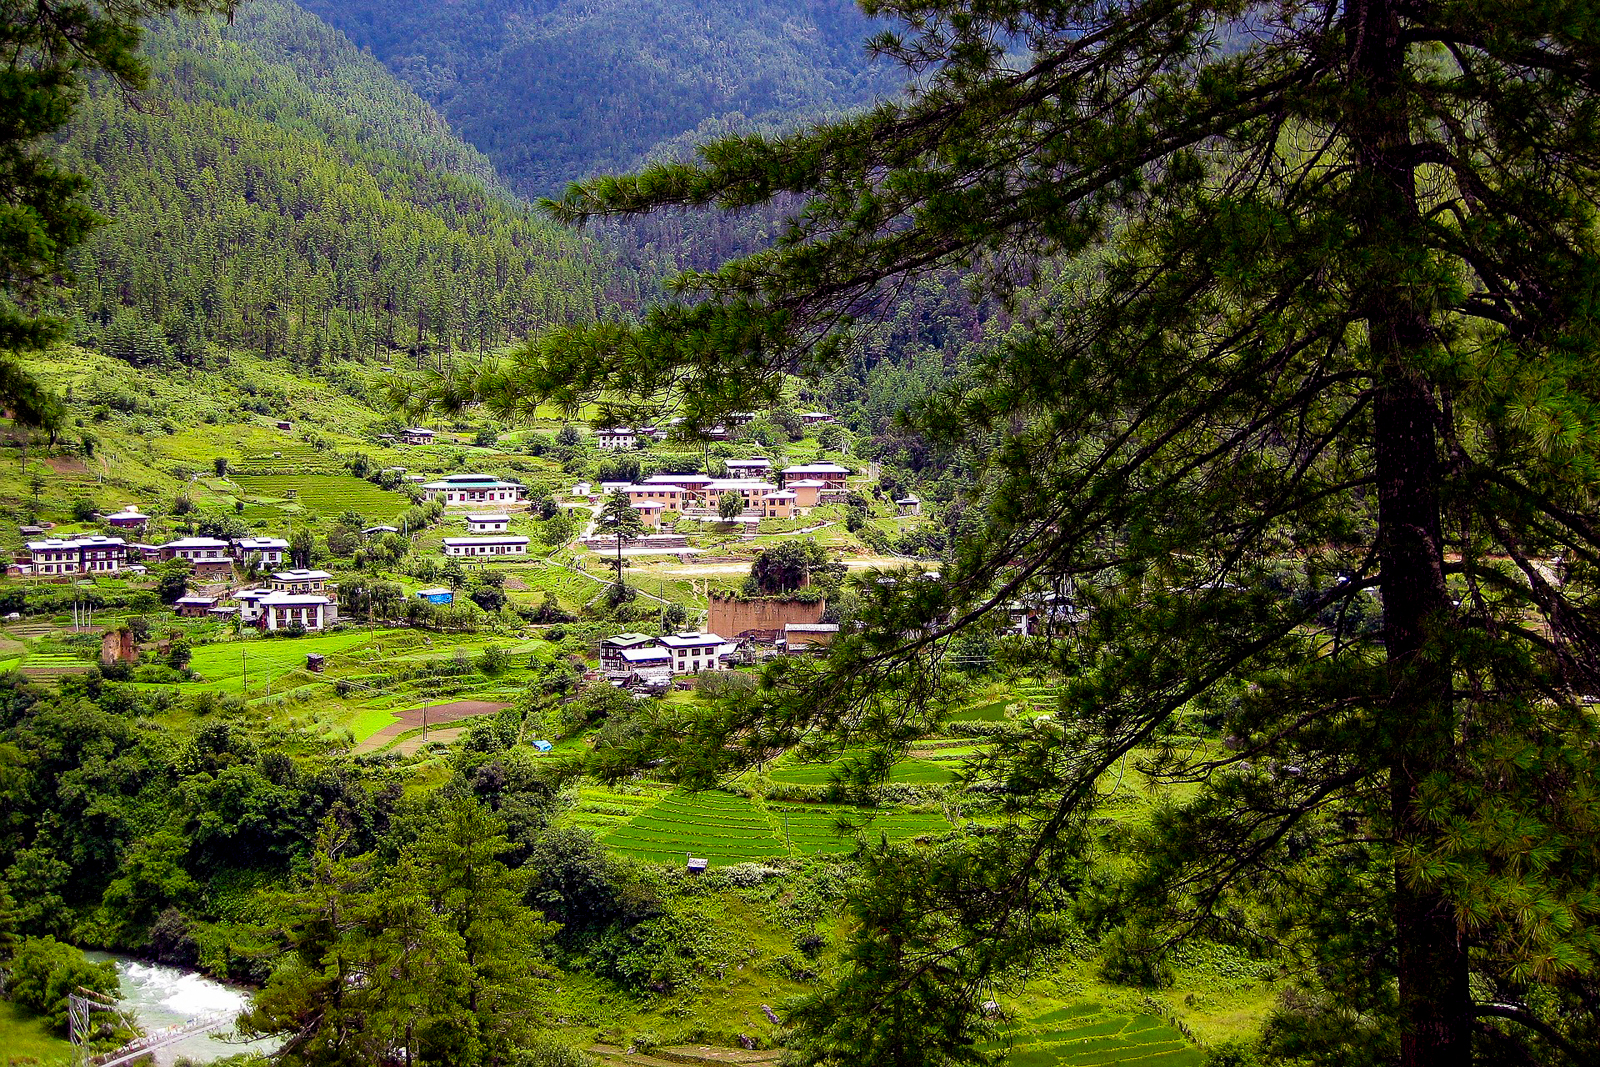 A village in the Bumthang Valley